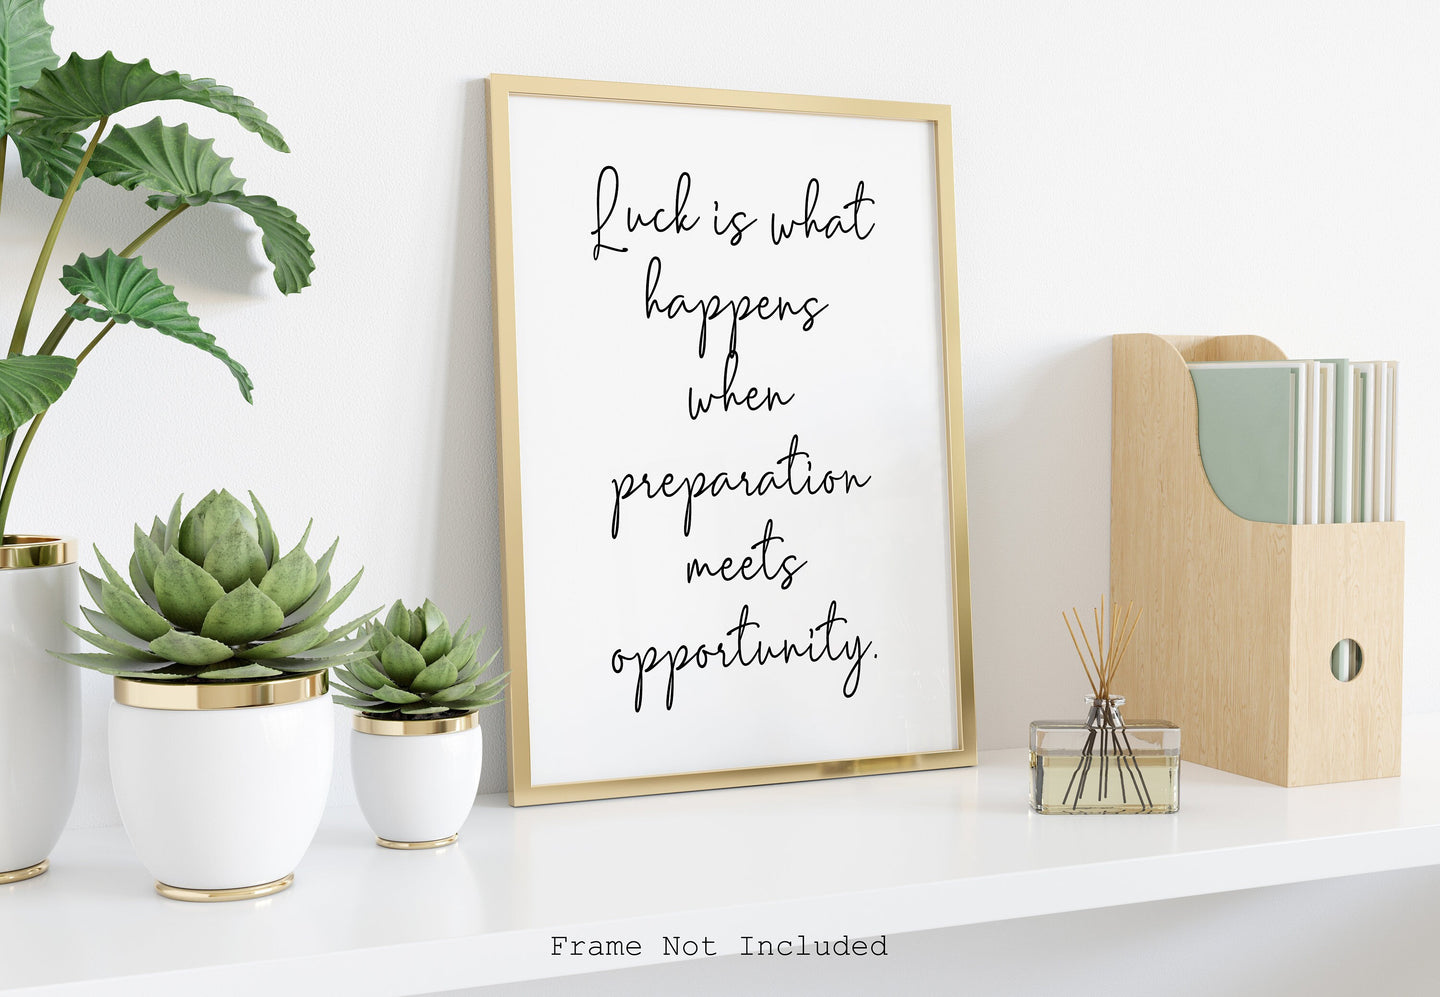 Seneca Quote - Luck is what happens when preparation meets opportunity - Motivational Wall Decor